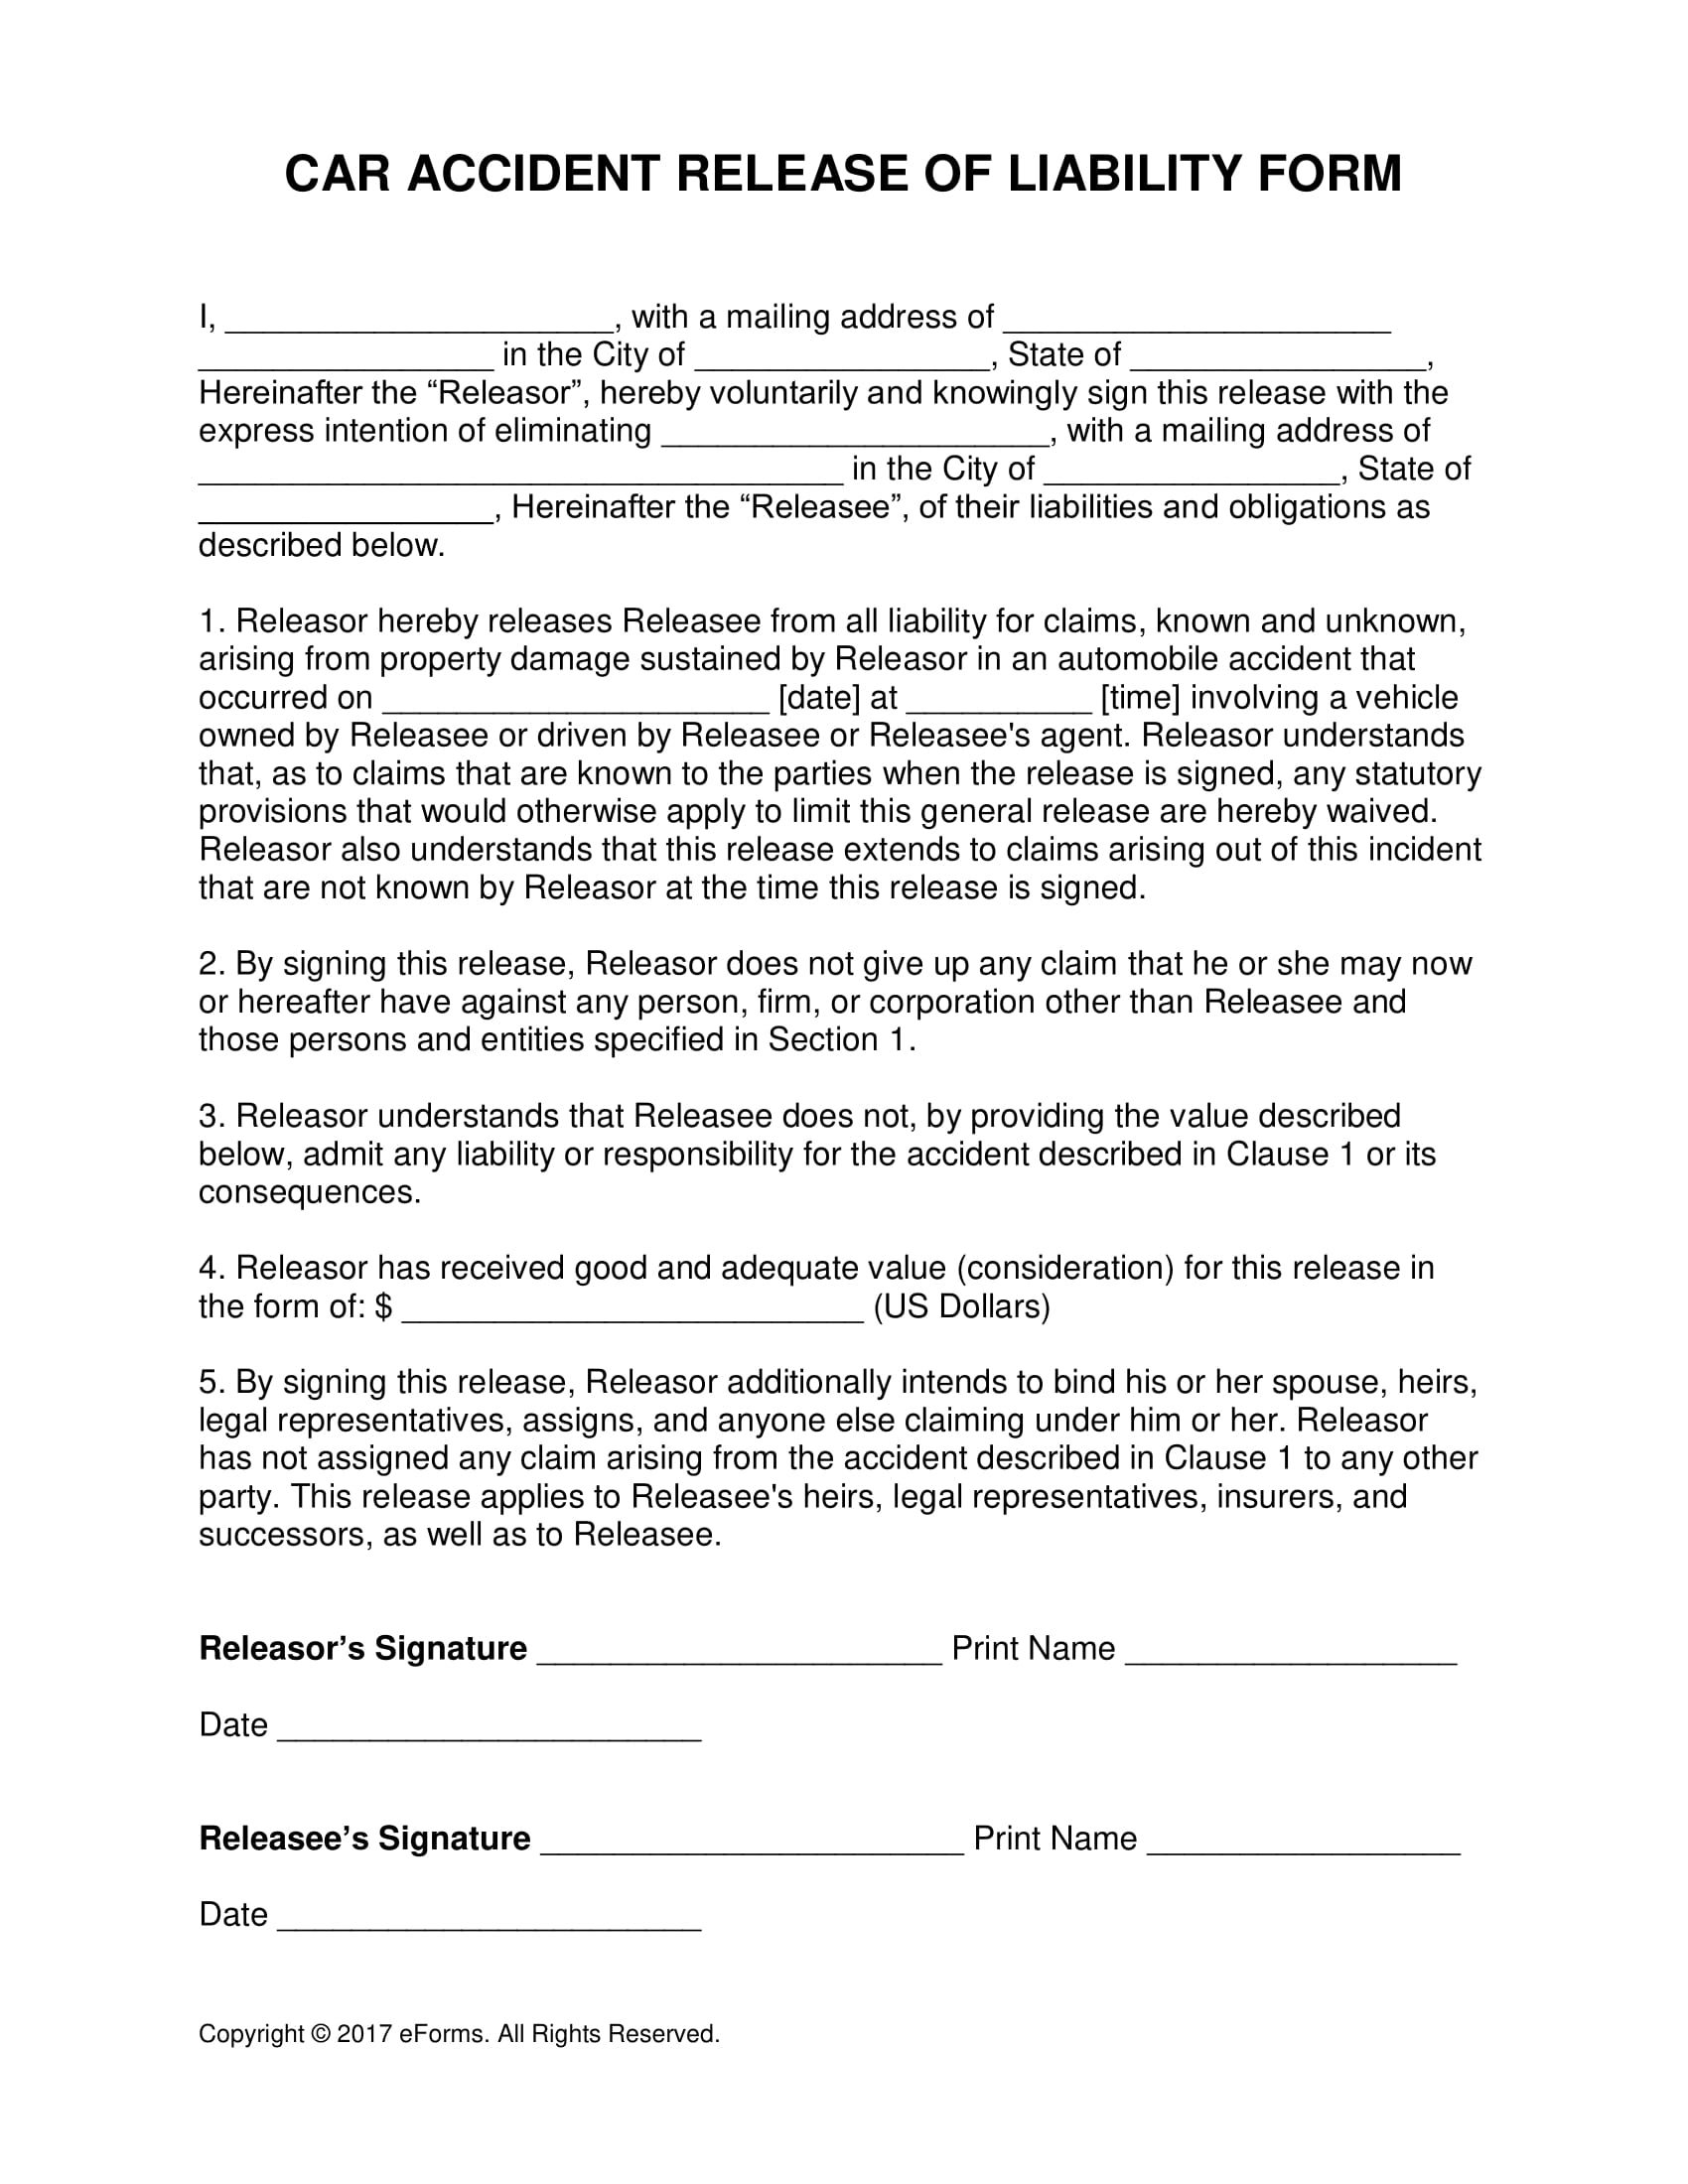 car accident waiver and release form 1